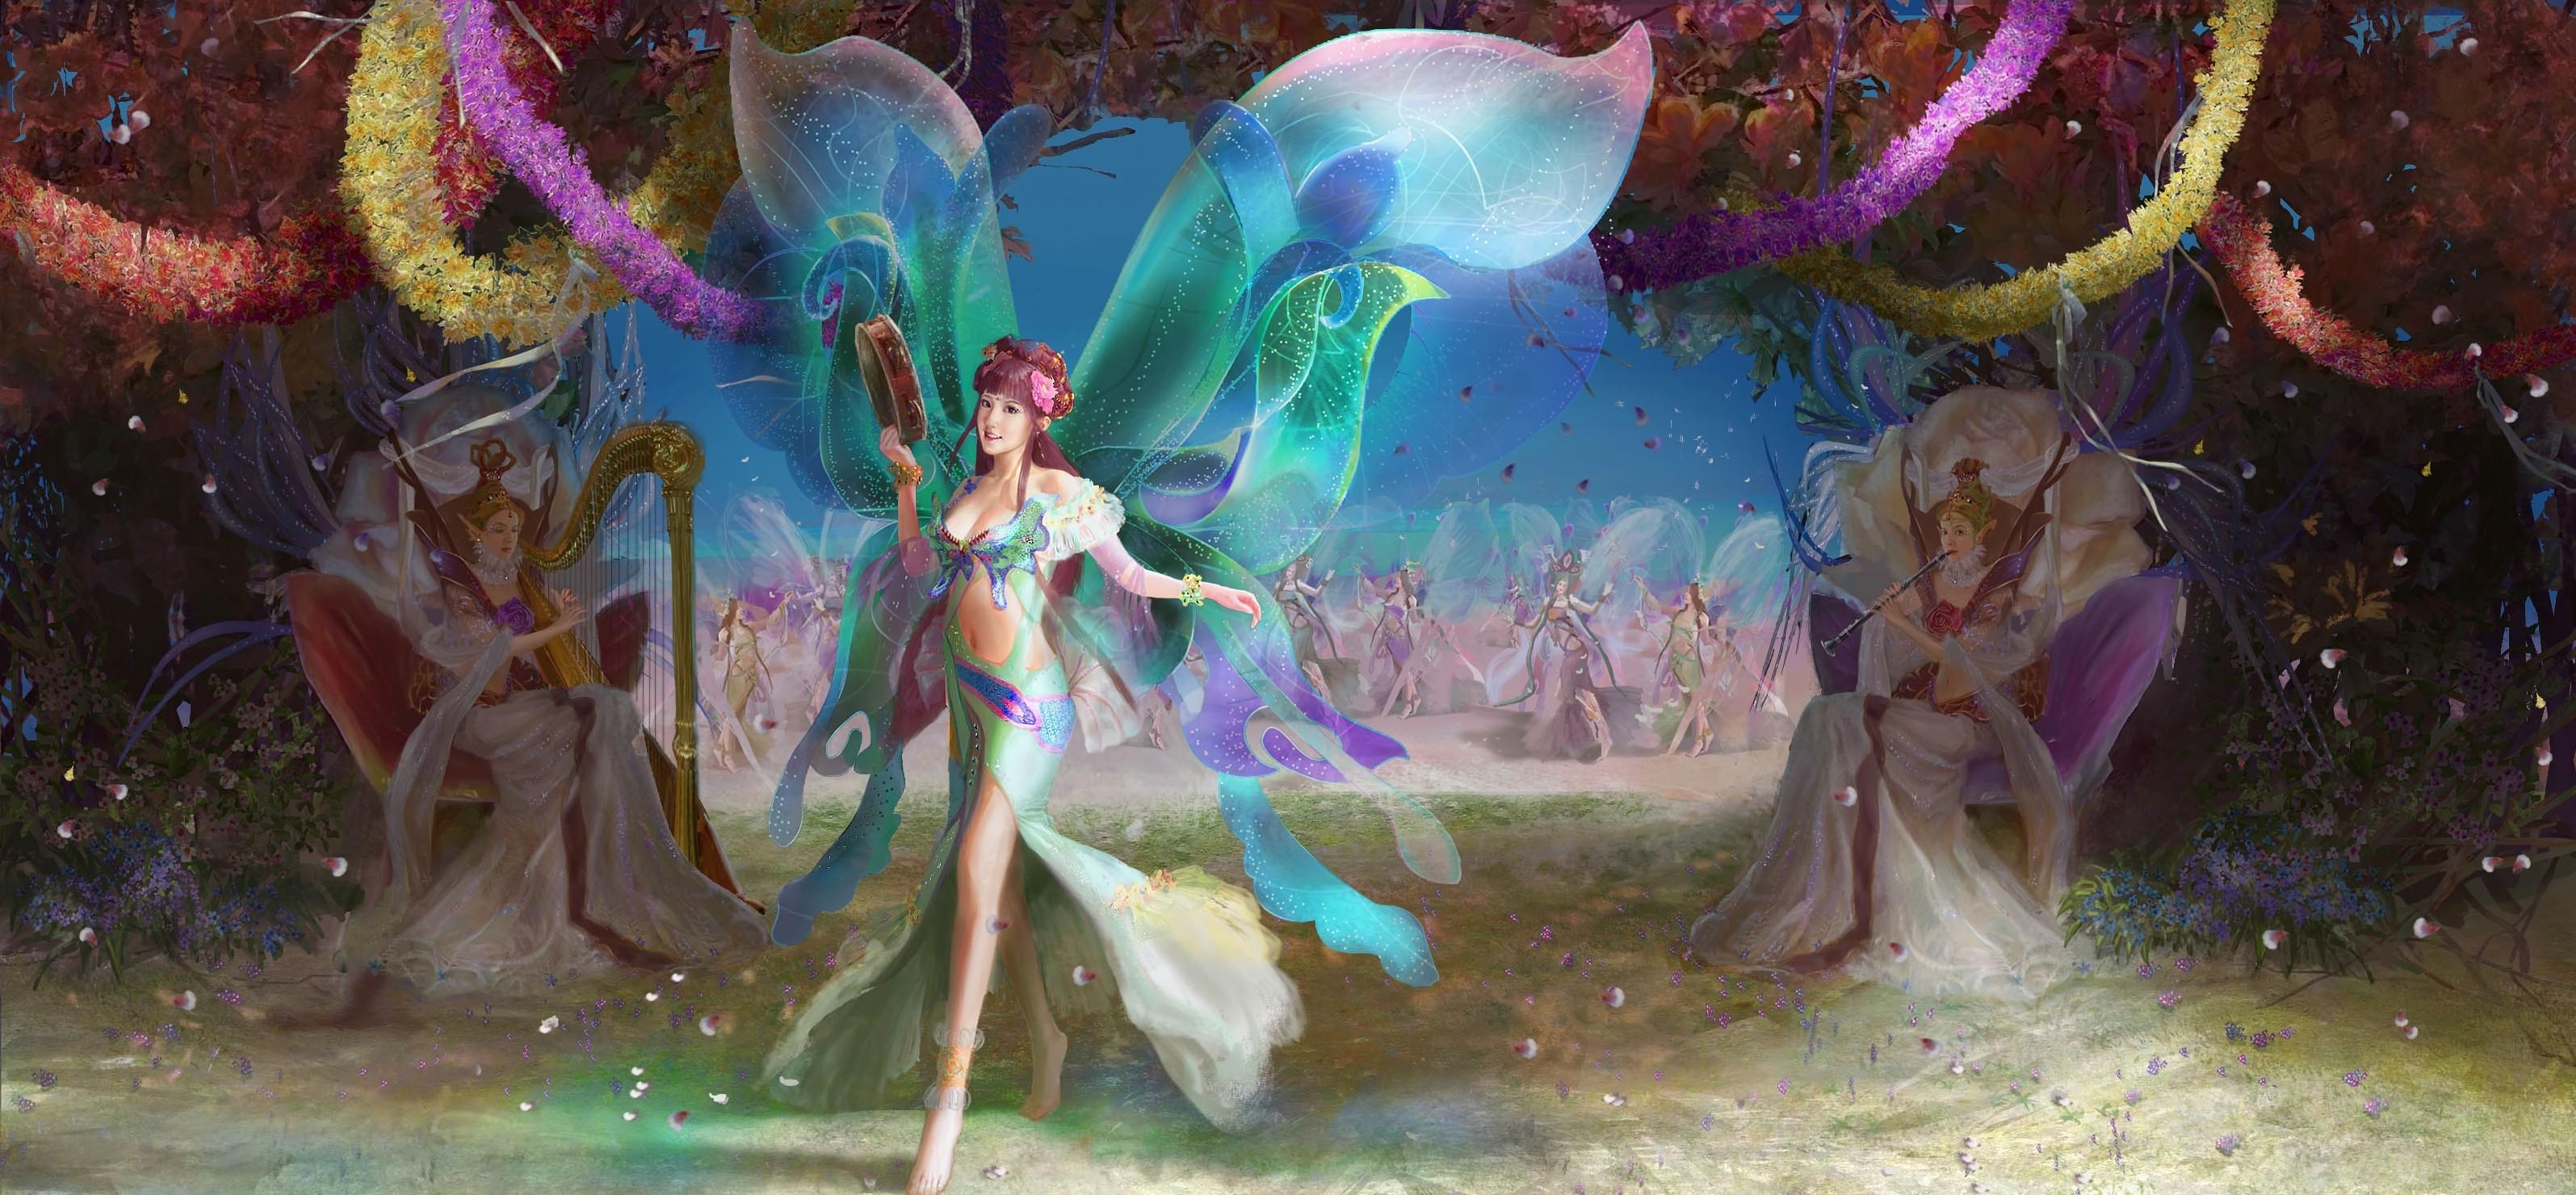 wings, flowers, fantasy, holiday, musical instruments, fairies images